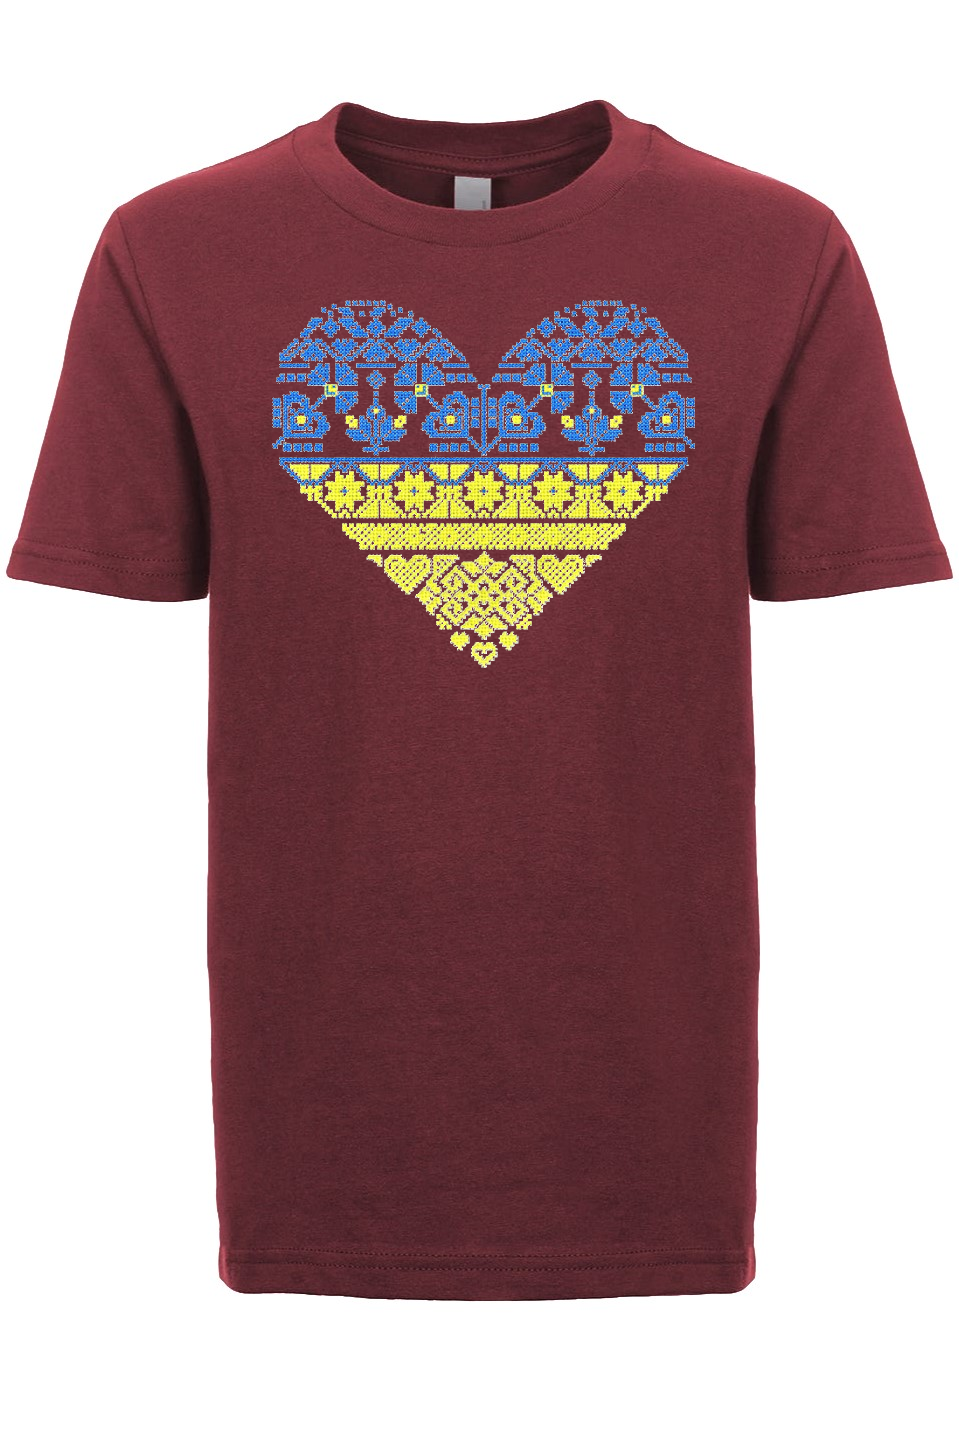 Kid's t-shirt "Blue and yellow heart"